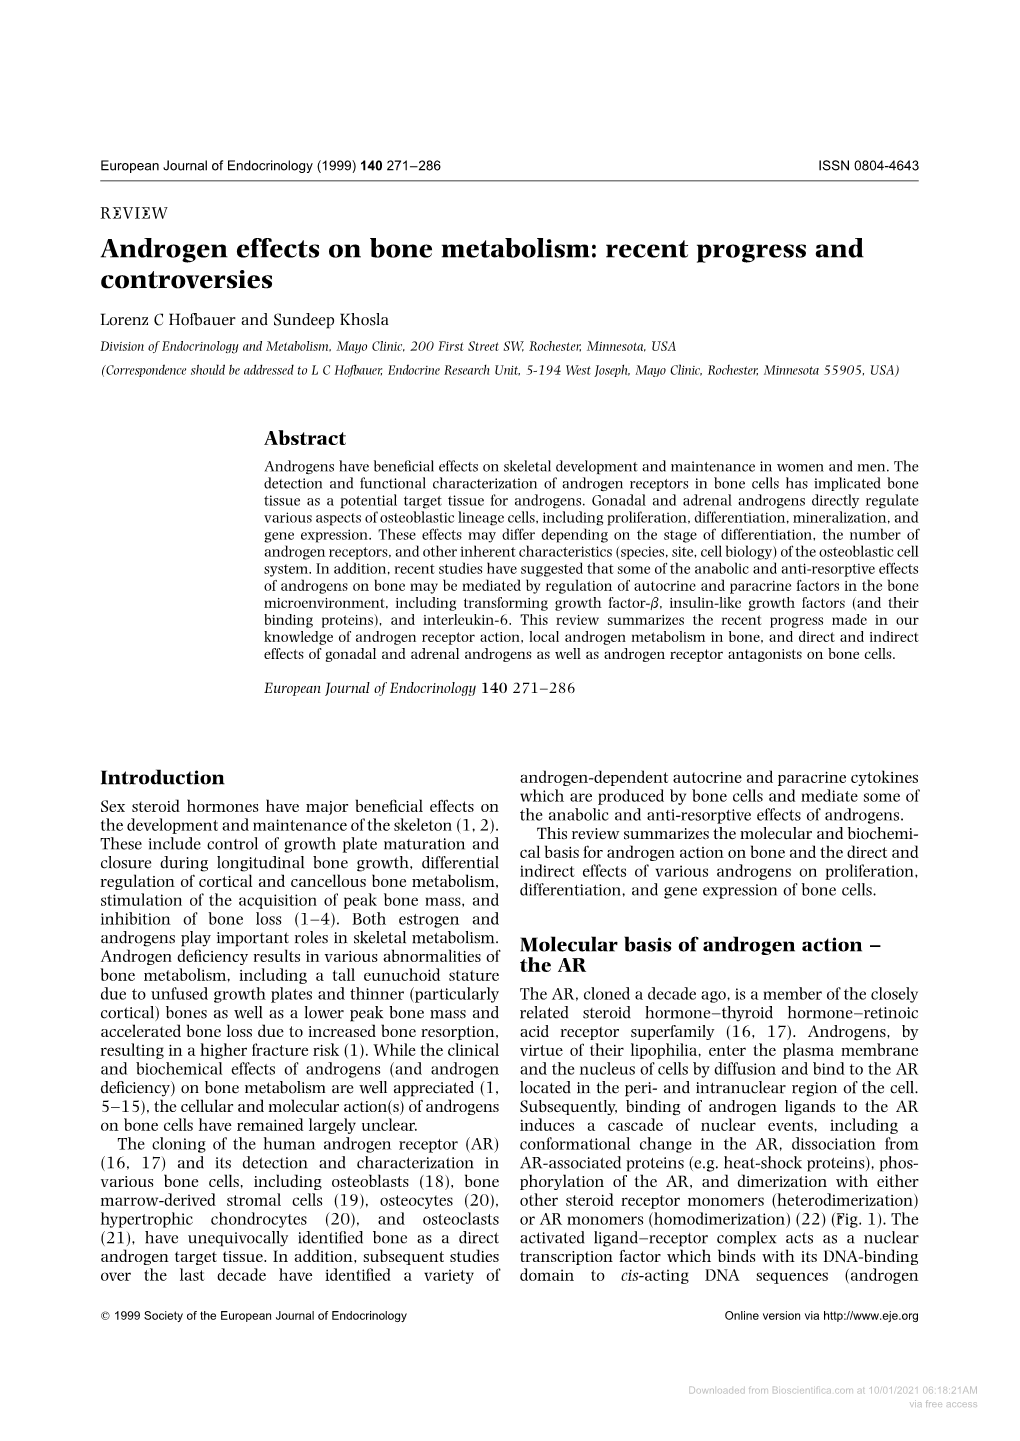 Androgen Effects on Bone Metabolism: Recent Progress and Controversies